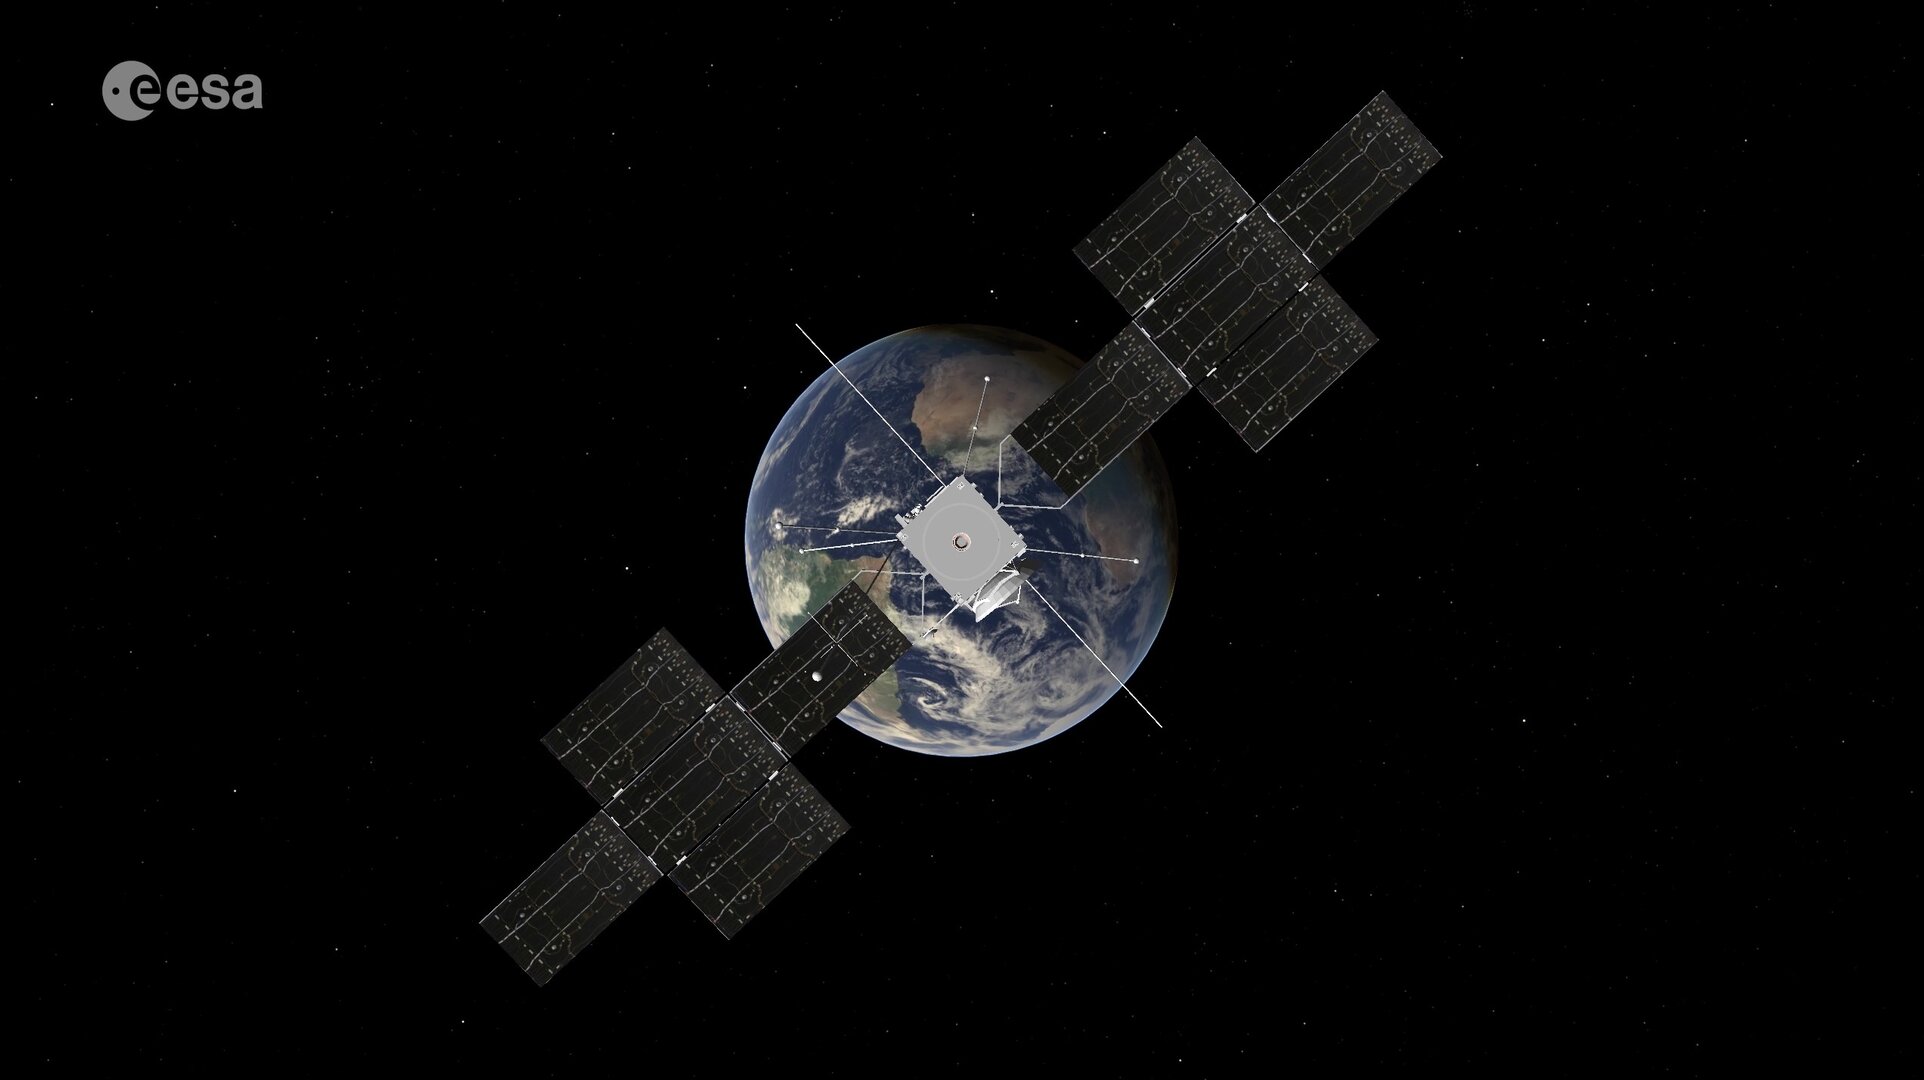 A depiction of the JUICE spacecraft heading back to Earth.